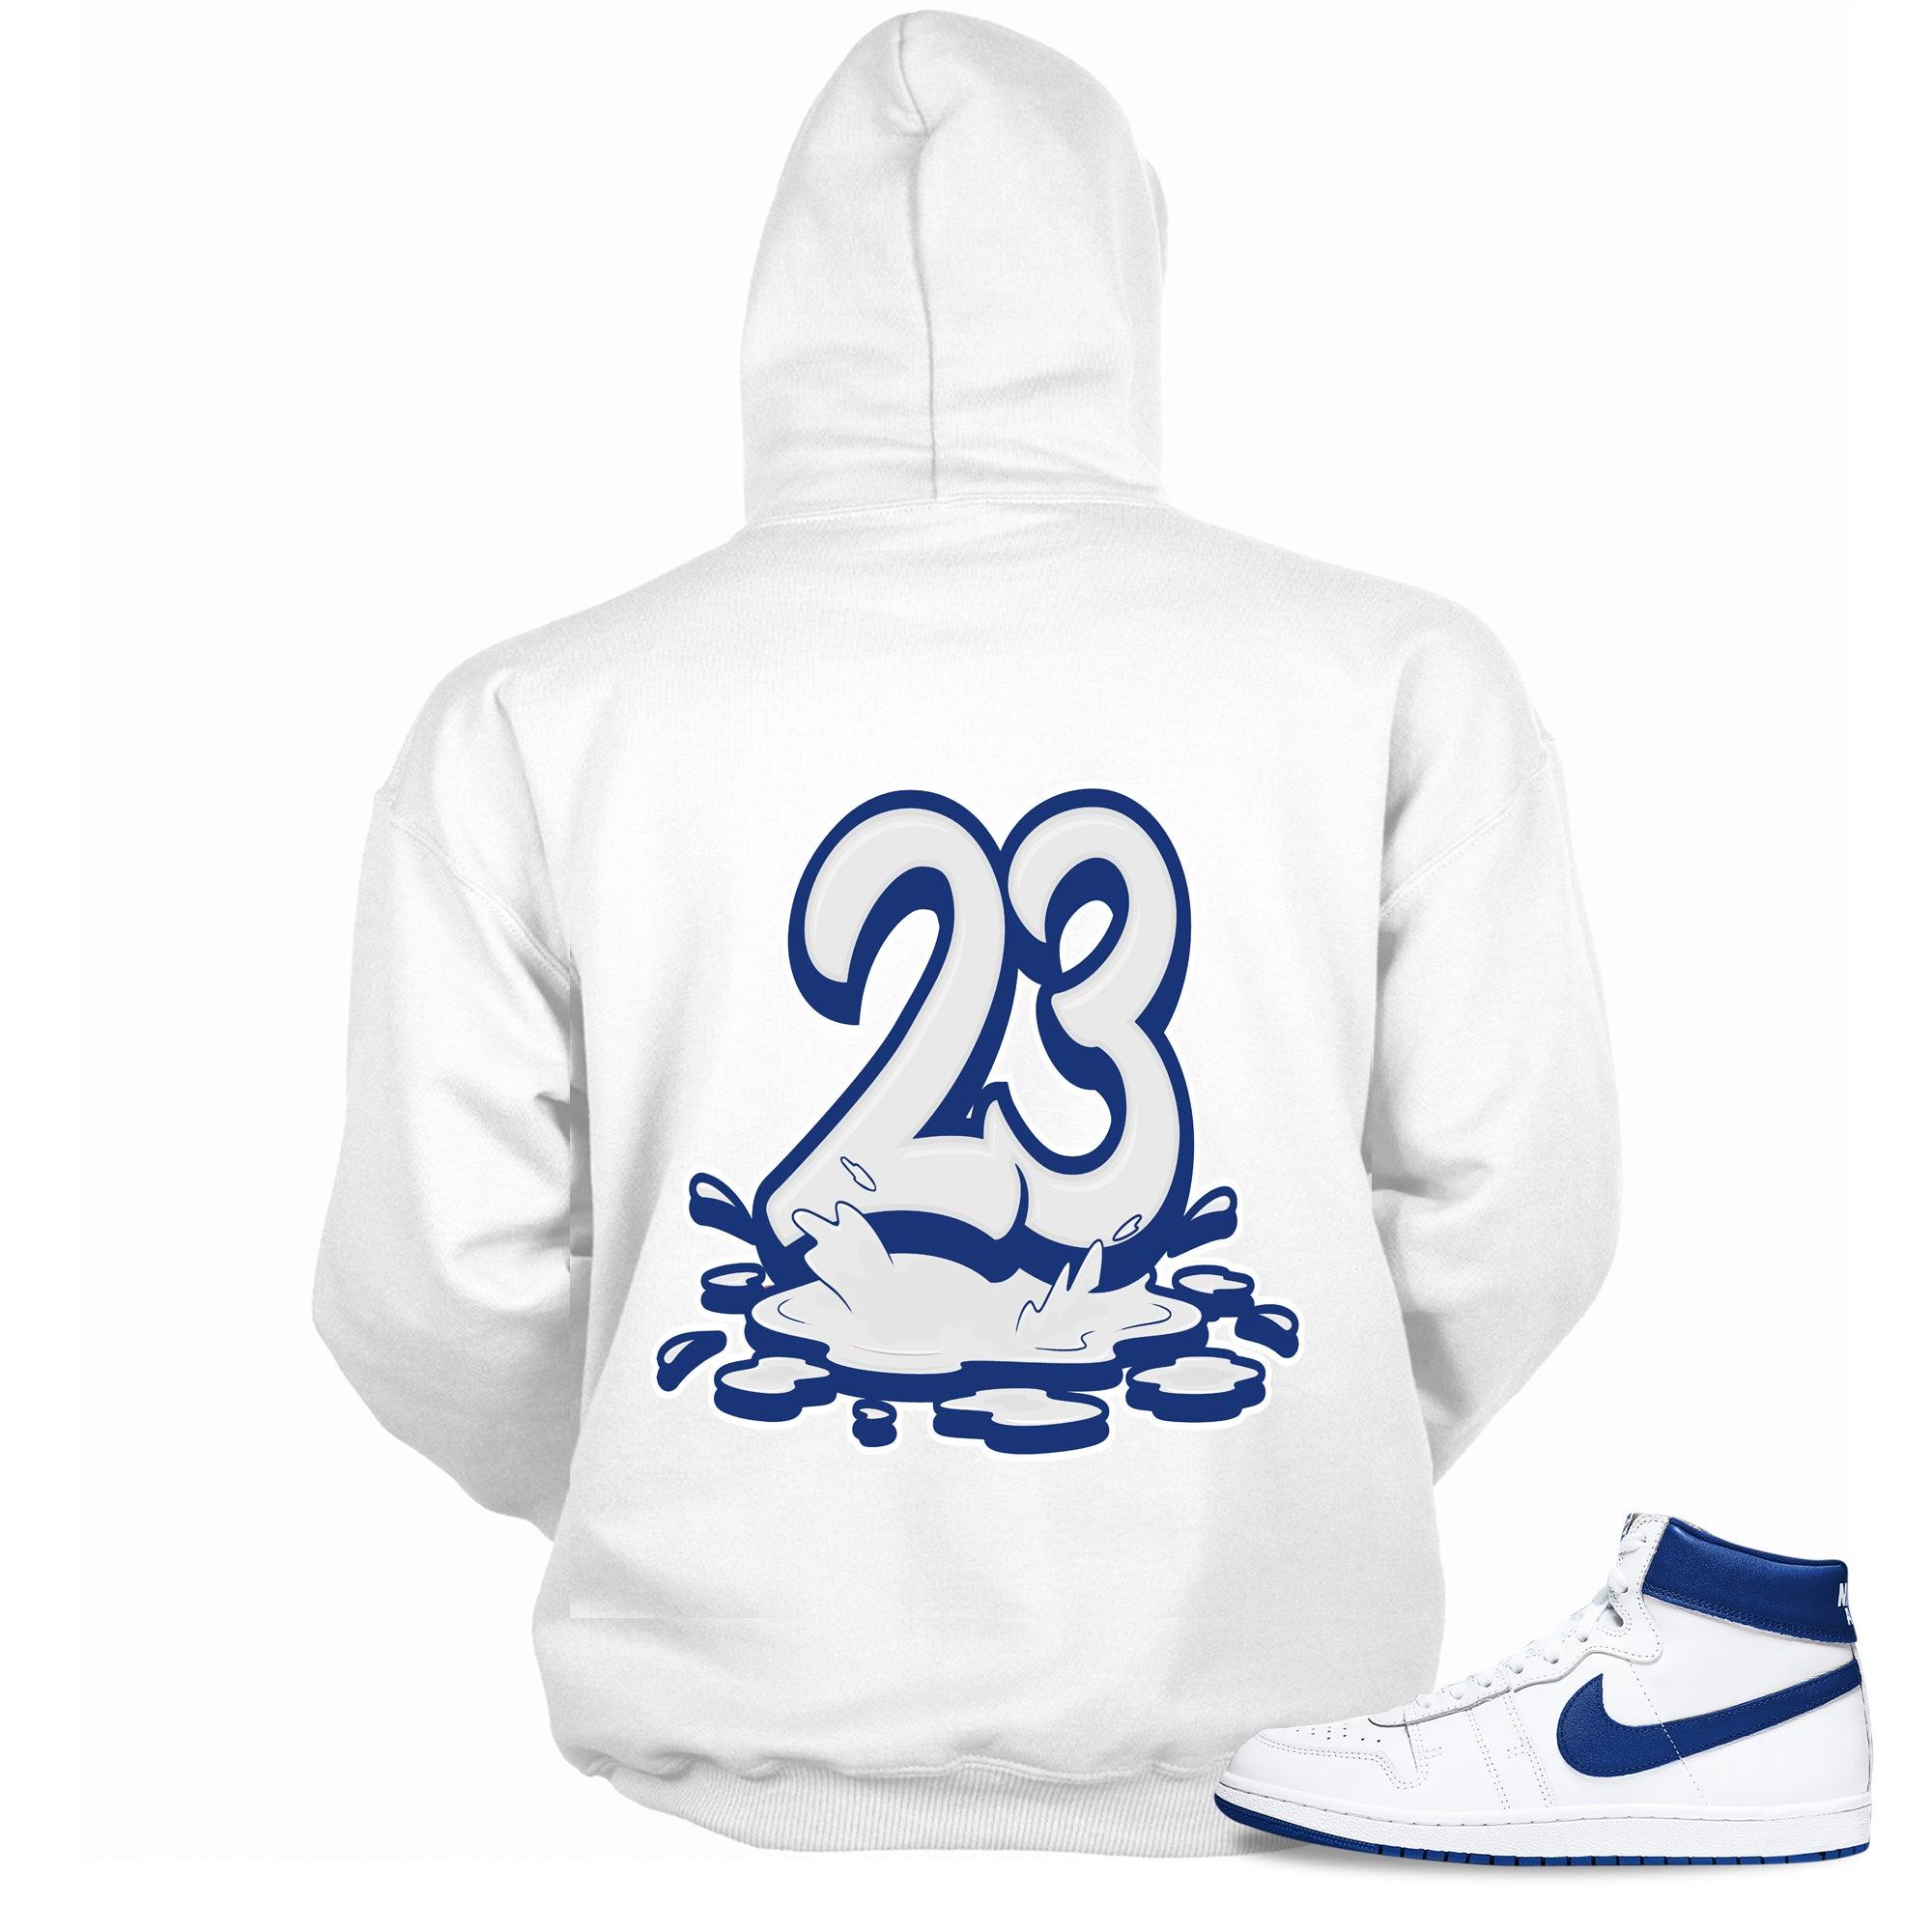 Number 23 Melting Hoodie Nike Air Ship A Ma Maniére Game Royal photo